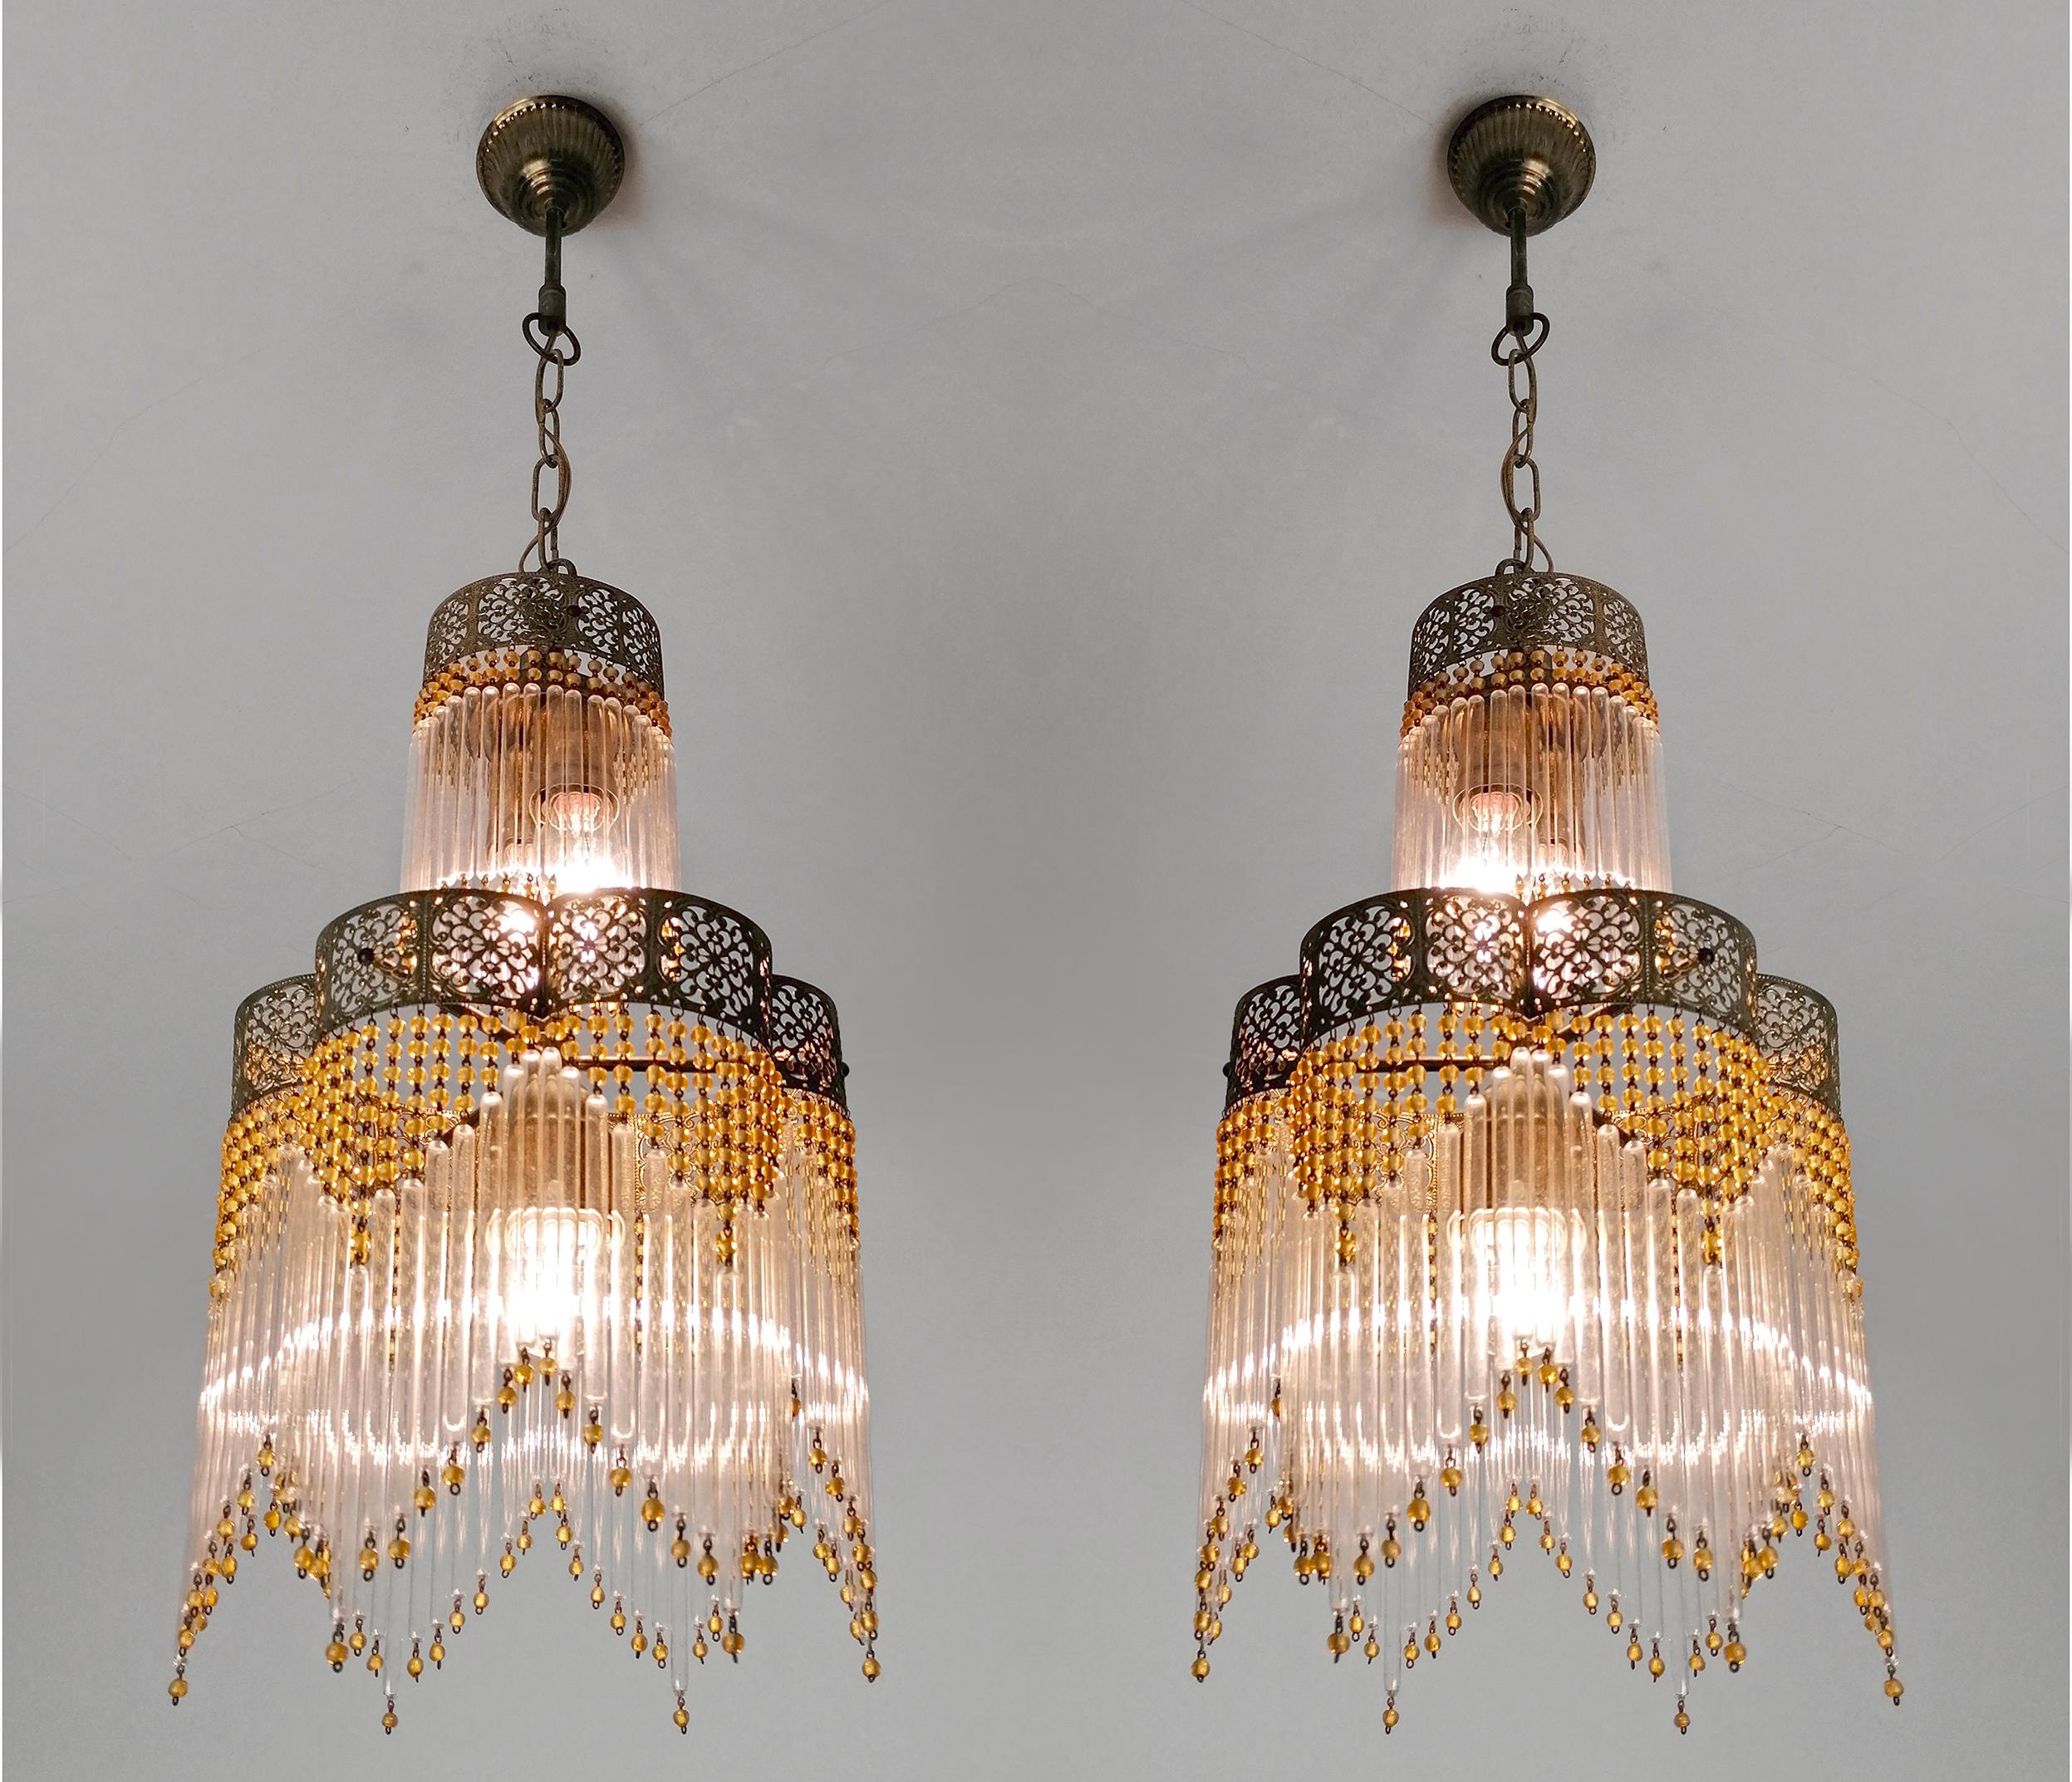 20th Century Pair of Art Deco & Art Nouveau Gilt Chandeliers with Amber Beads & Glass Fringe